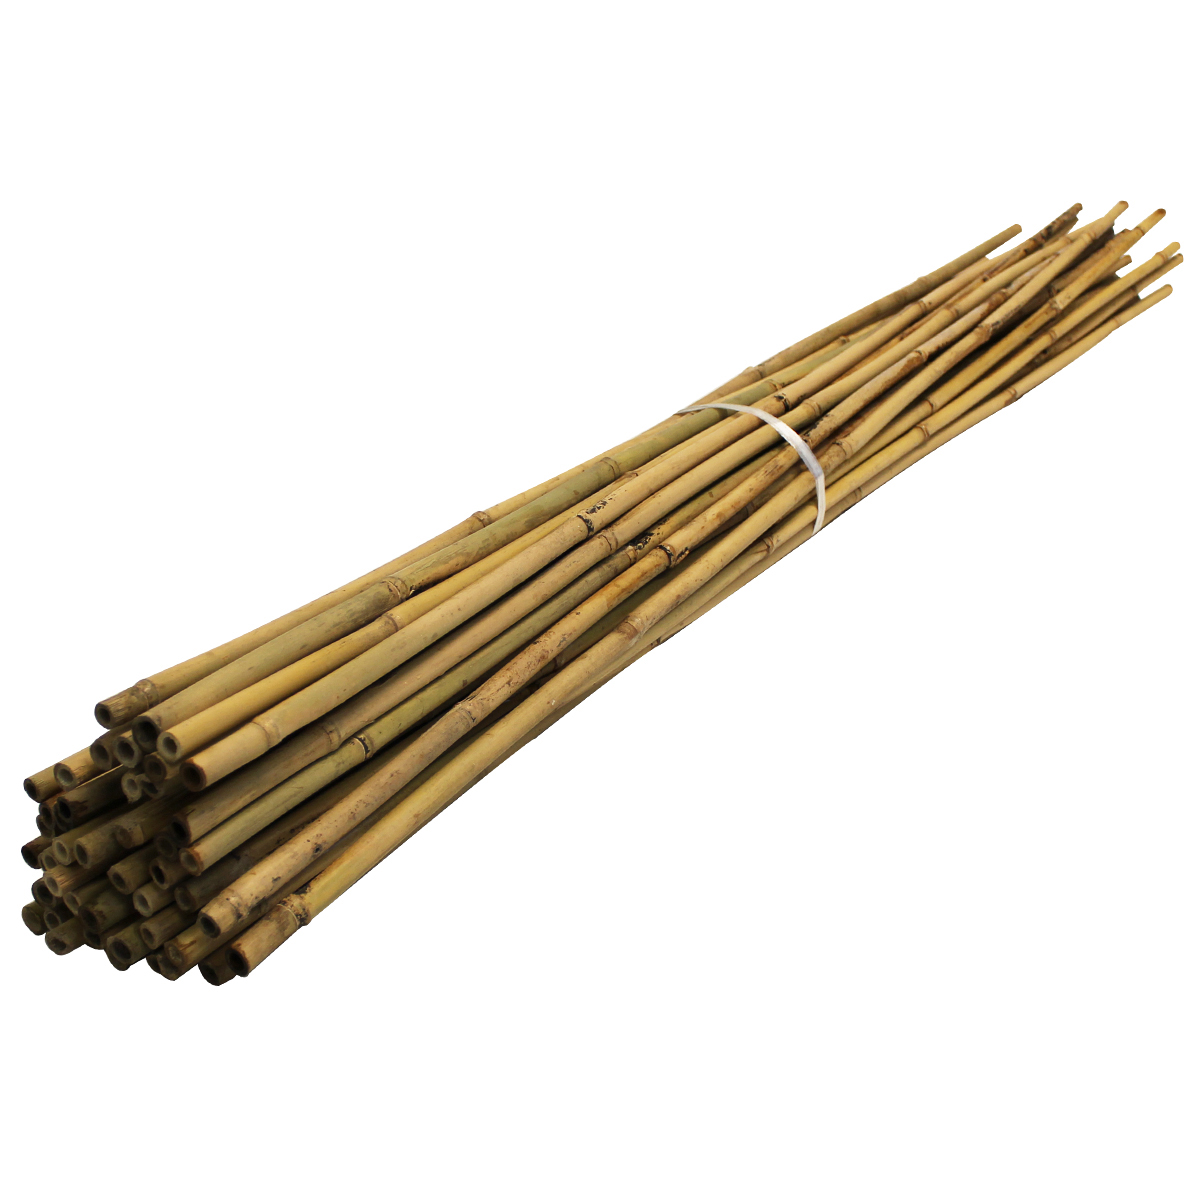 Strong Heavy Duty Professional Bamboo Plant Support Garden Canes 120cm/4foot UK 